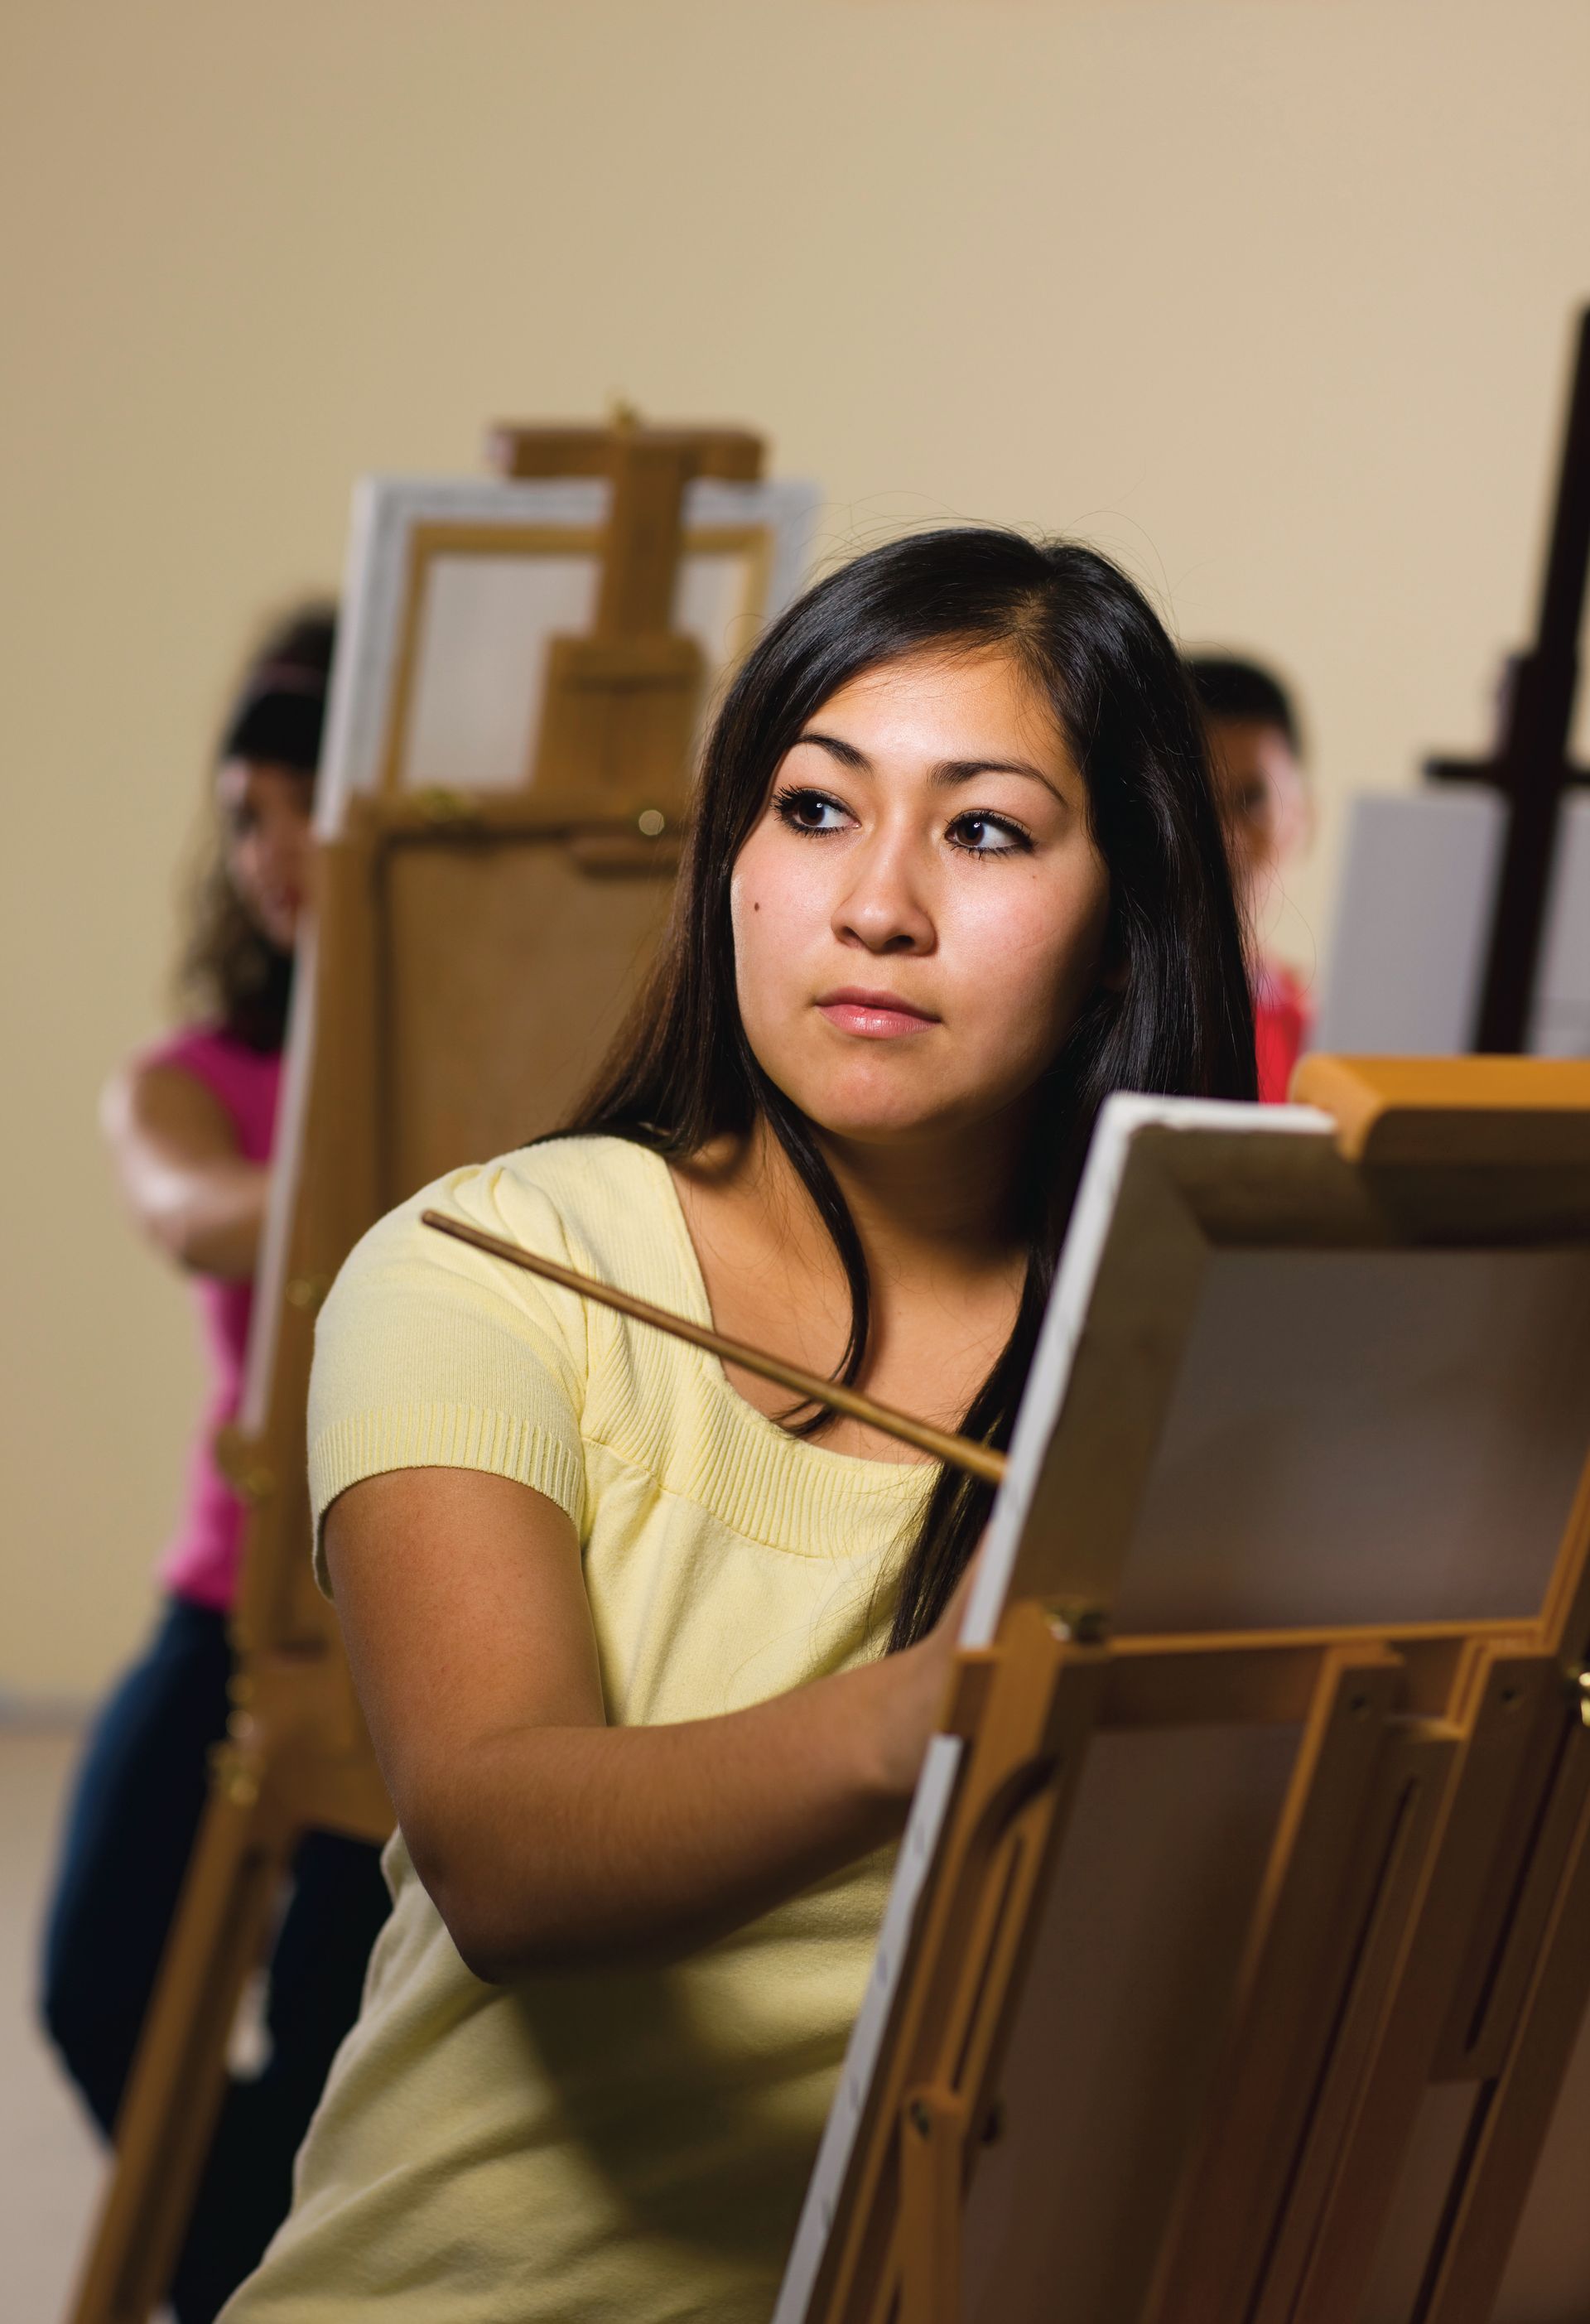 A young woman sits at an easel and paints.